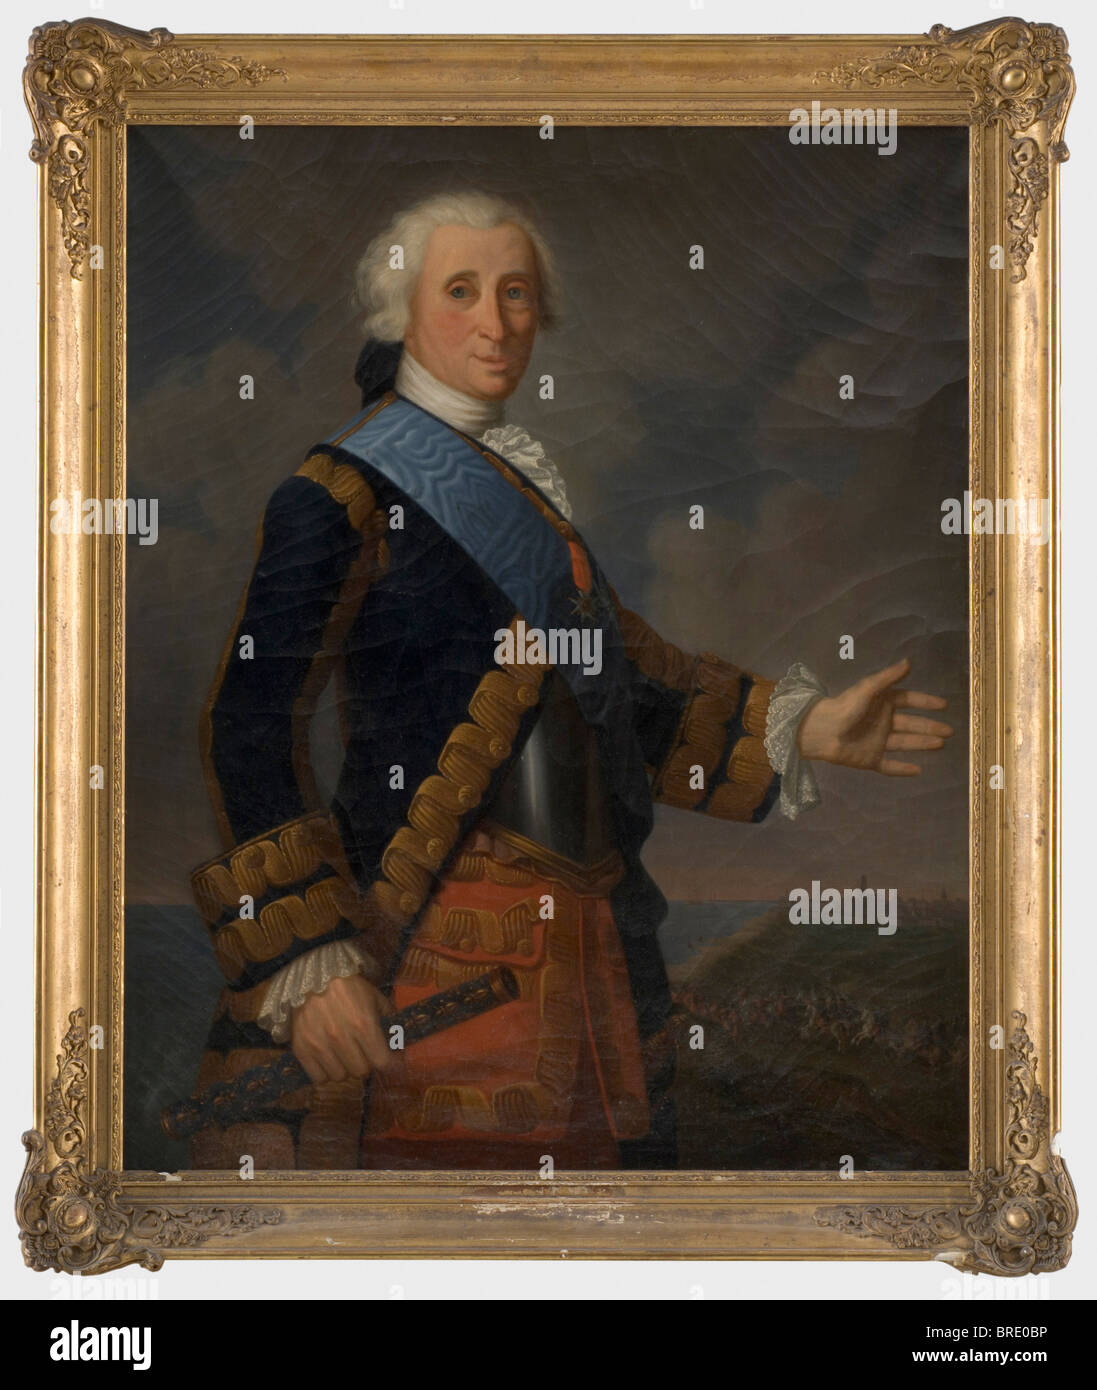 Emanuel de Croy (1718 - 1784), a portrait of the Marshal of France, after 1783 Oil on canvas, relined. The marshal in a cuirass, with the sash of the Order of the Holy Spirit, the Order of Saint Louis and his marshal's baton in his hand. In the background a cavalry battle and marching infantry, in the far distance a city by the sea. Gilt plaster frame, dented. Extensive craquelure. Painting 82 x 100 cm, framed 96 x 116 cm. Emanuel de Croy was appointed Marshal of France on 13th June 1783, shortly before his death. His grandfather, Philippe Emanuel, had held a c, Stock Photo